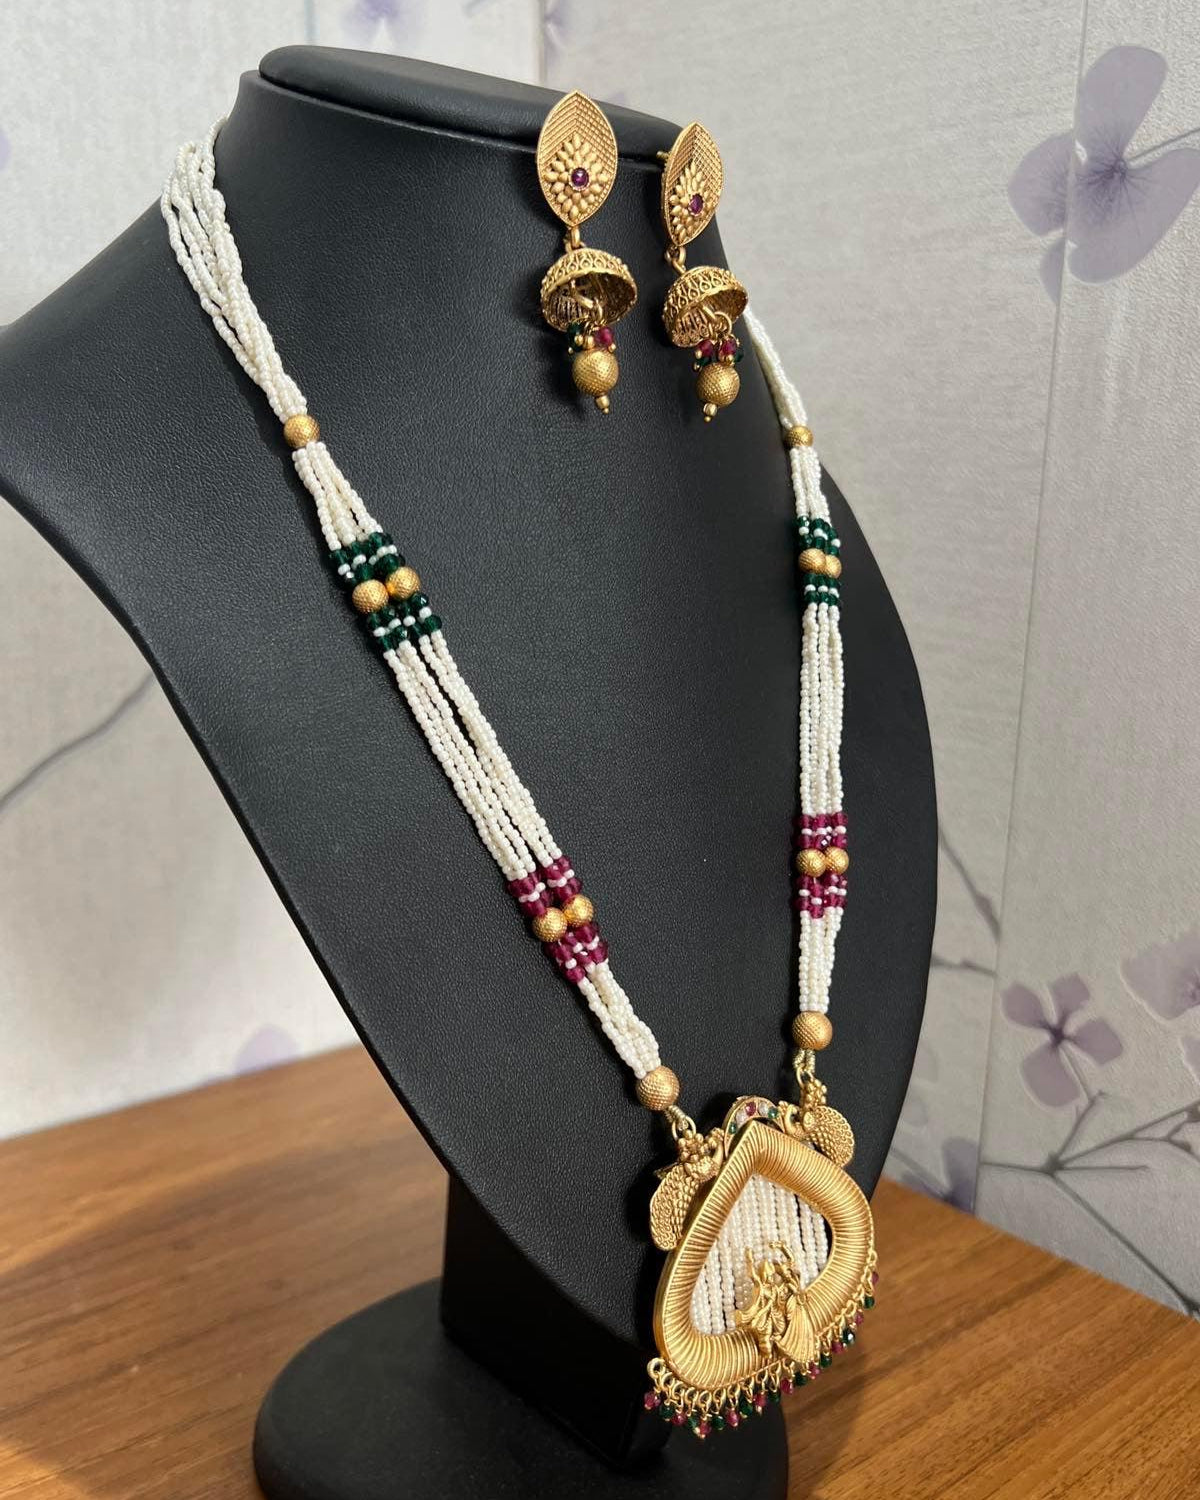 Gold Plated Temple Necklace Set with White Pote - Boutique Nepal